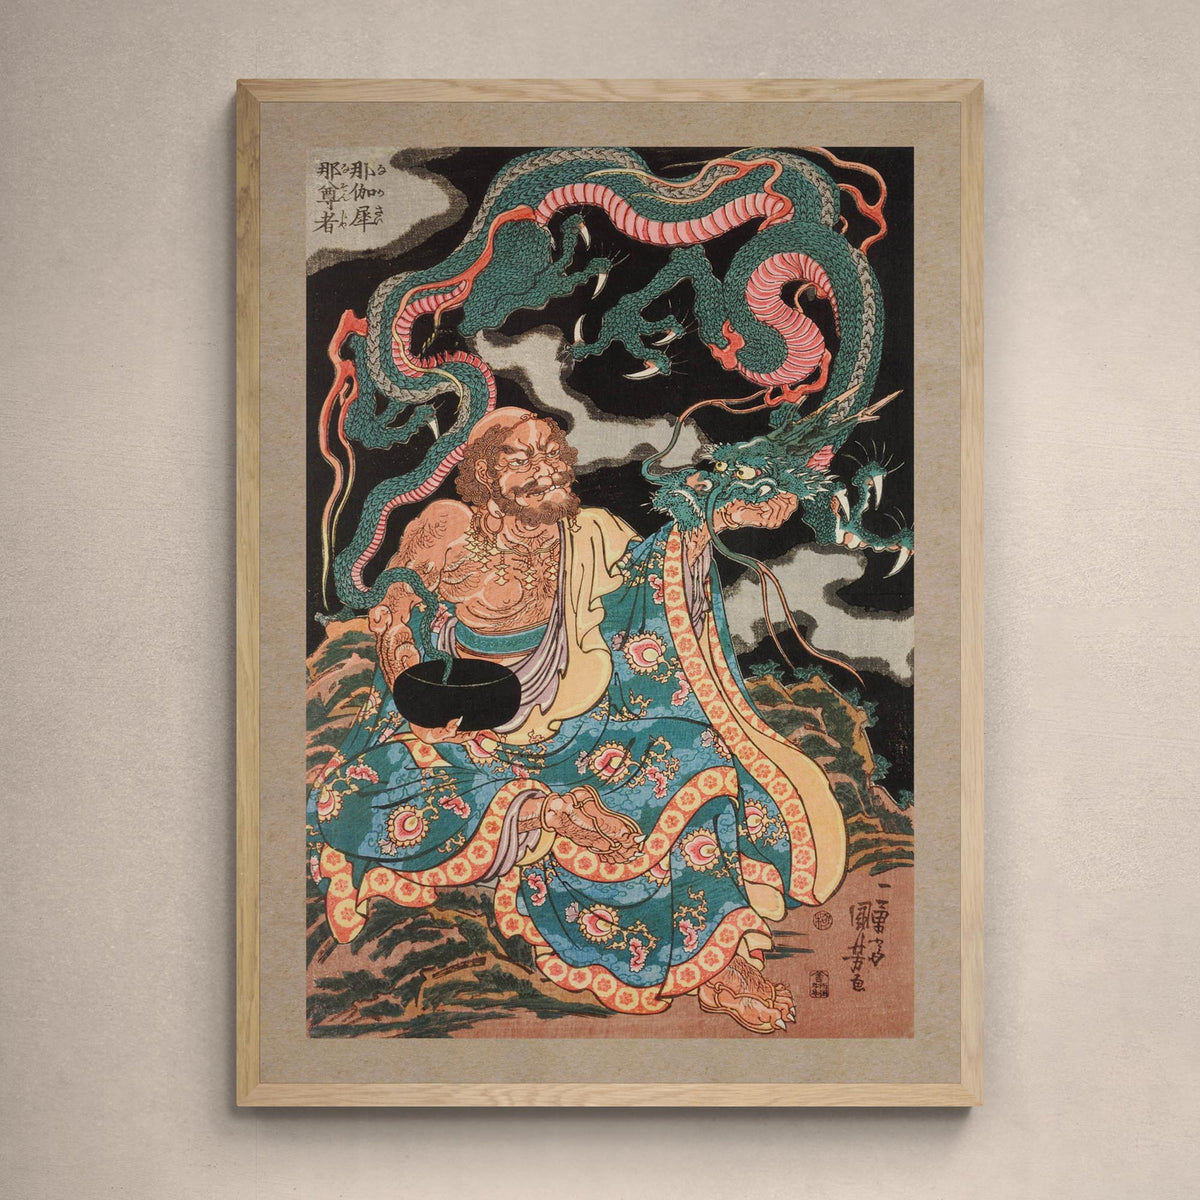 Framed Print 6&quot;x8&quot; / Natural Frame The Arhat Nakasaina Sonja Seated On a Rock, with a Dragon Emerging From His Bowl, Vintage Buddhist Japanese Framed Art Print